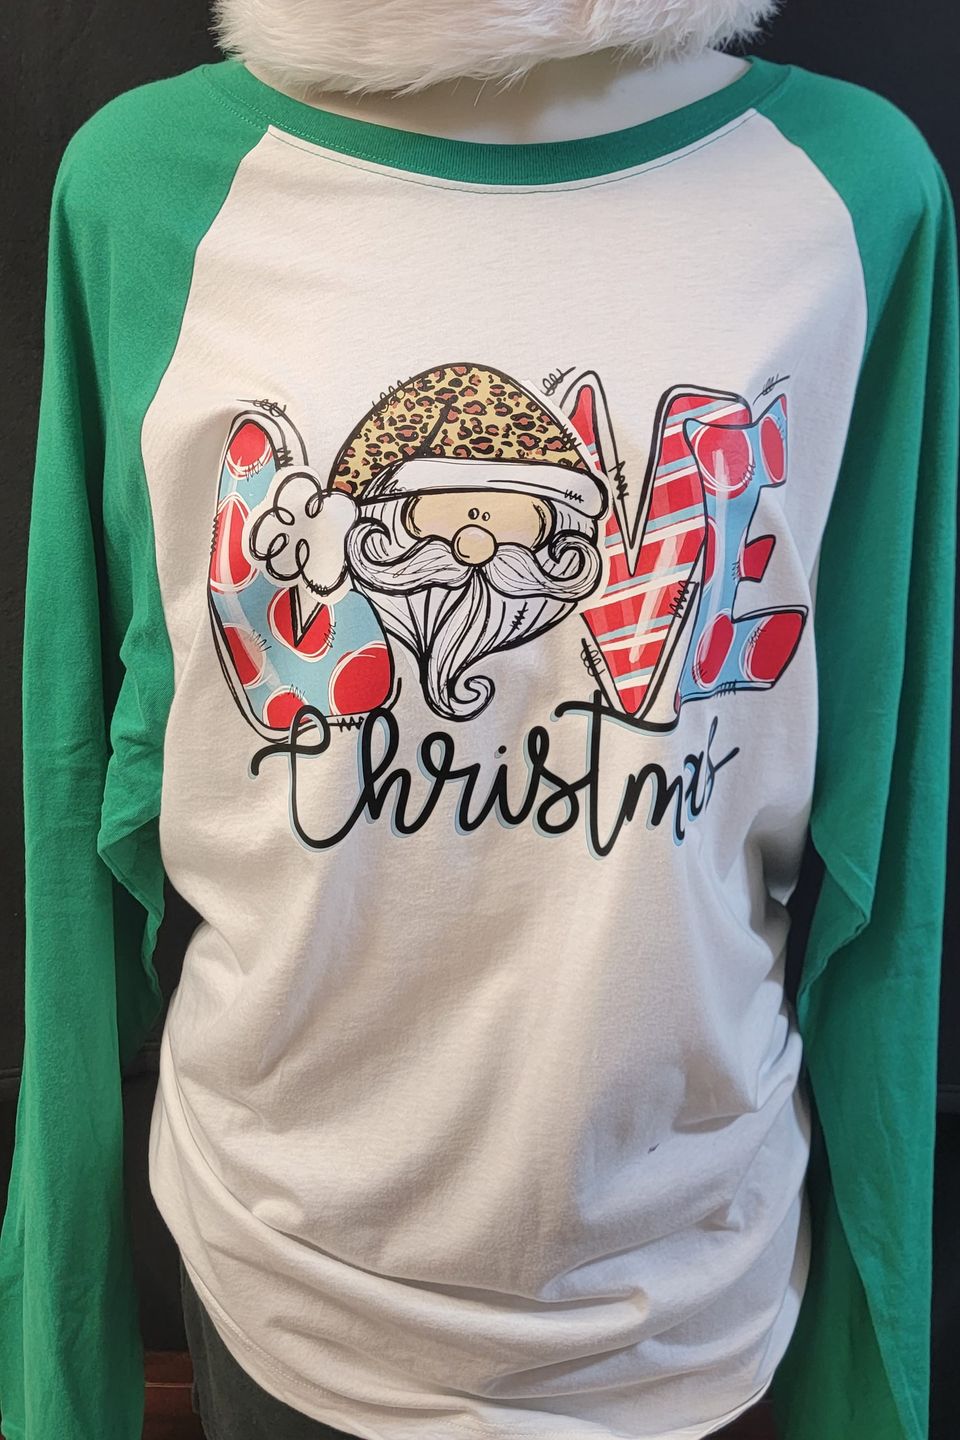 Example of a "Love Christmas" t-shirt using direct-to-film transfer (DTF) from SaRi's Creations.